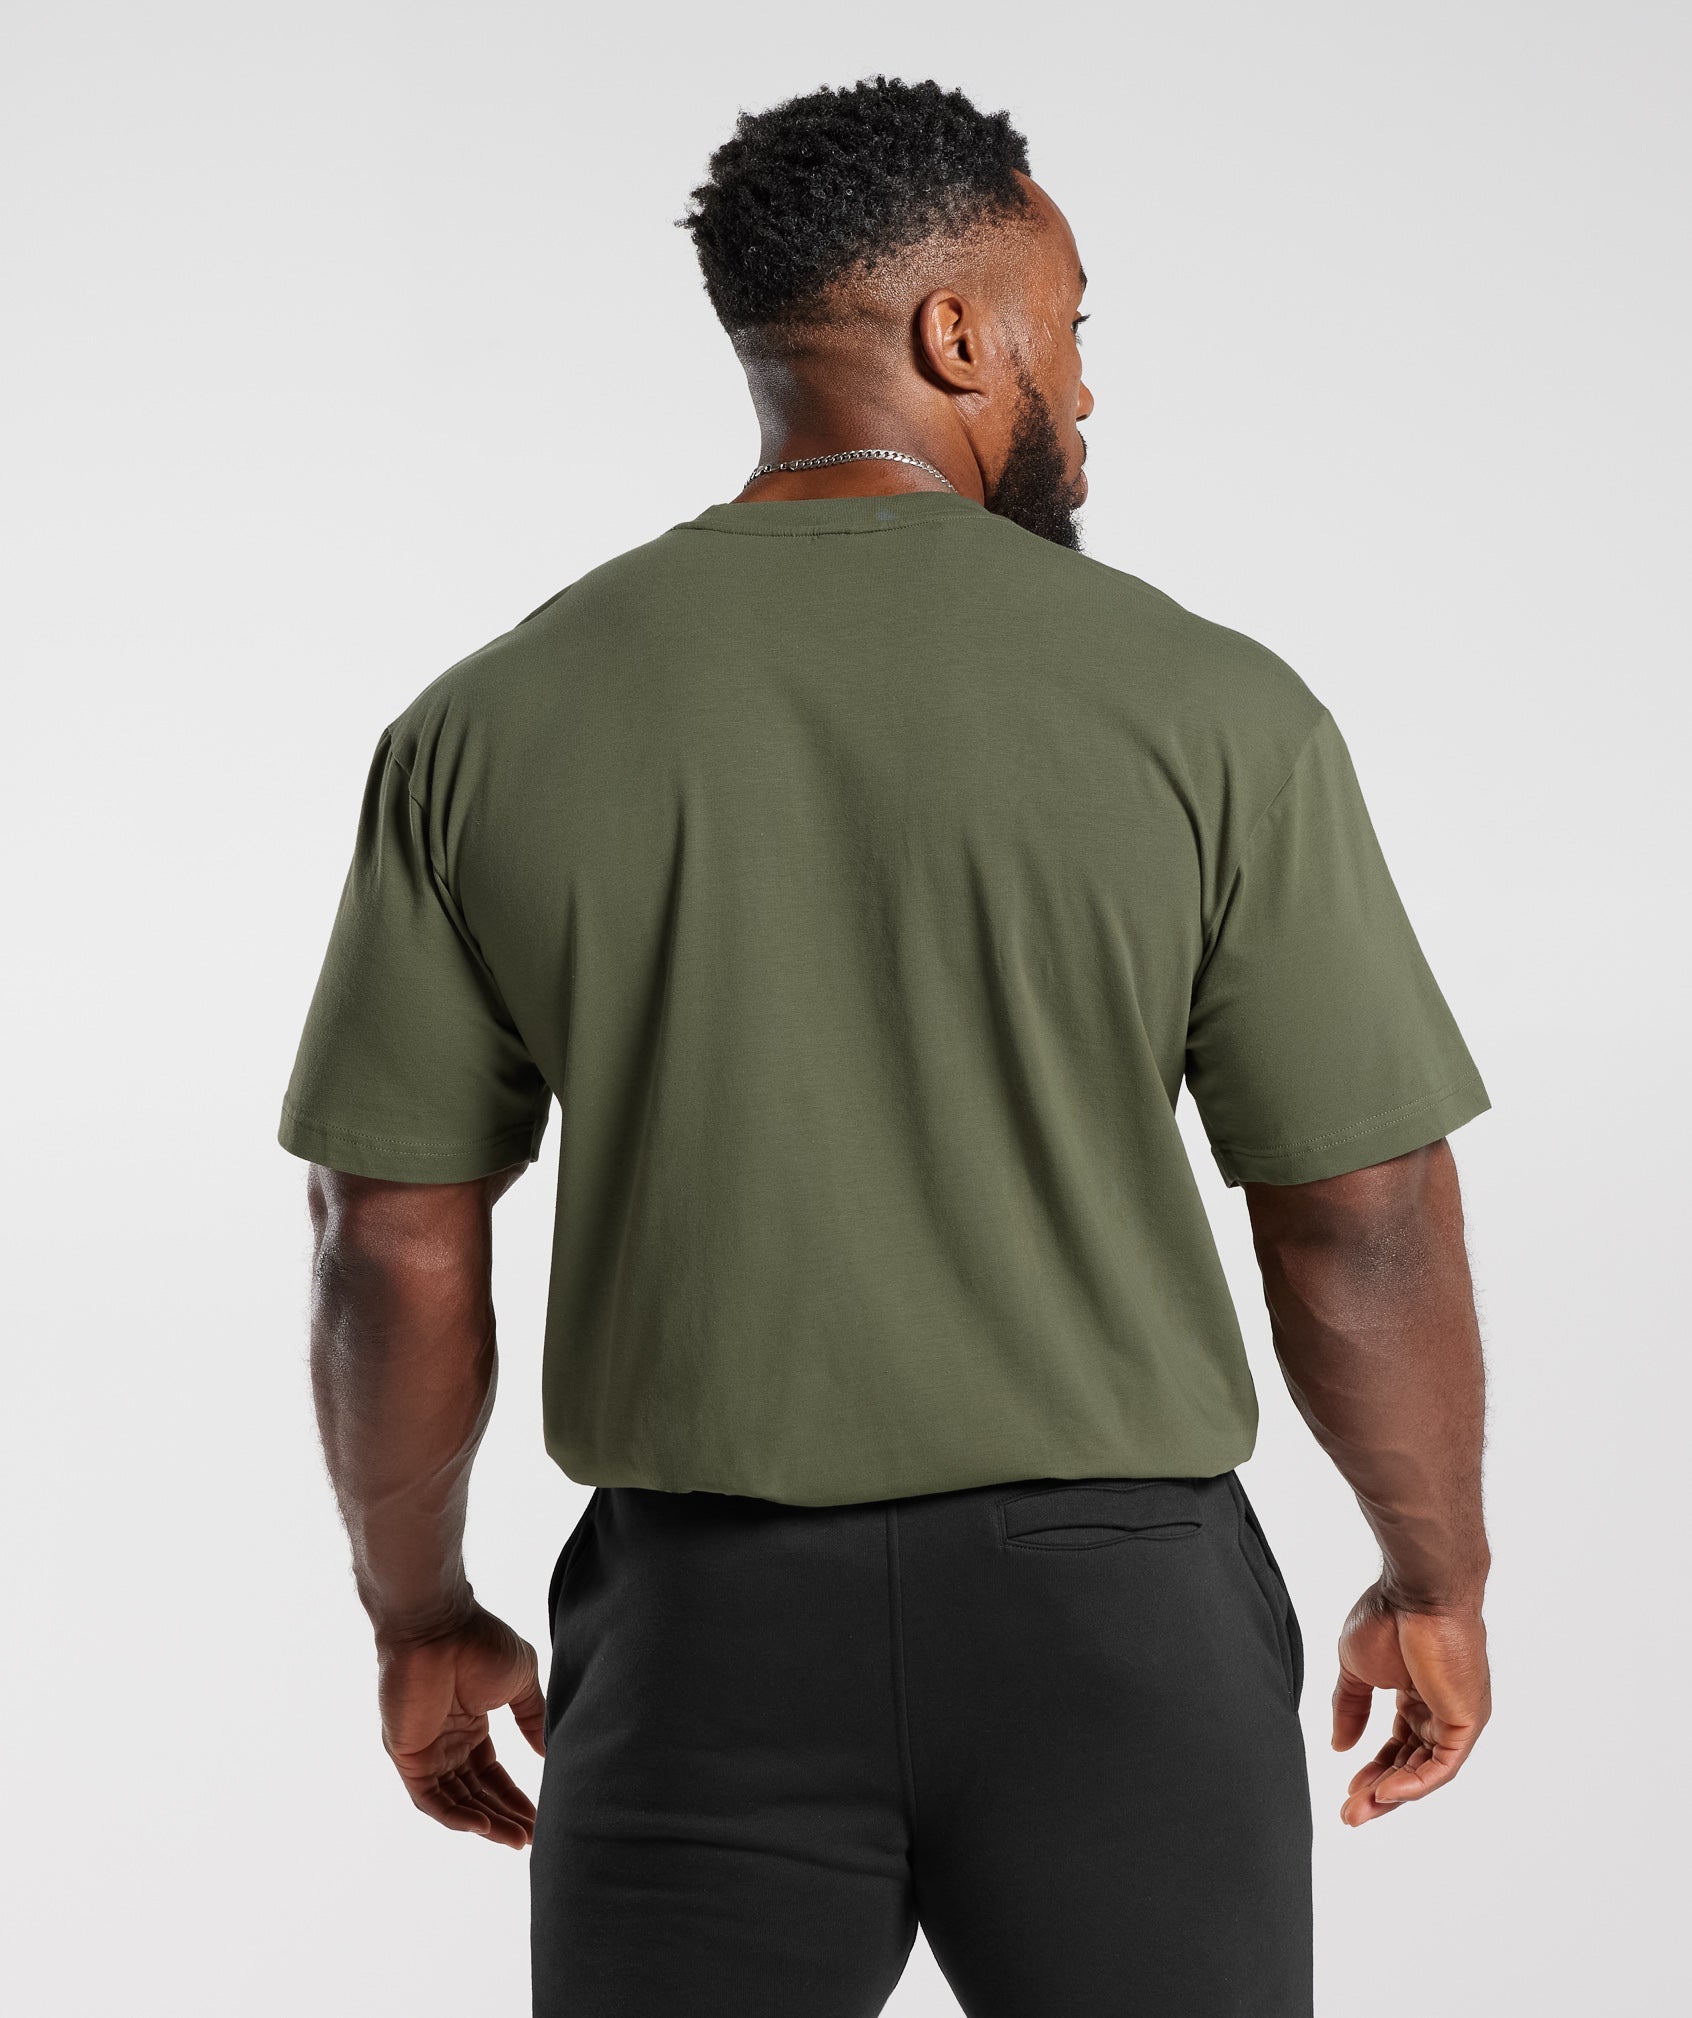 Apollo Oversized T-Shirt in Core Olive - view 2